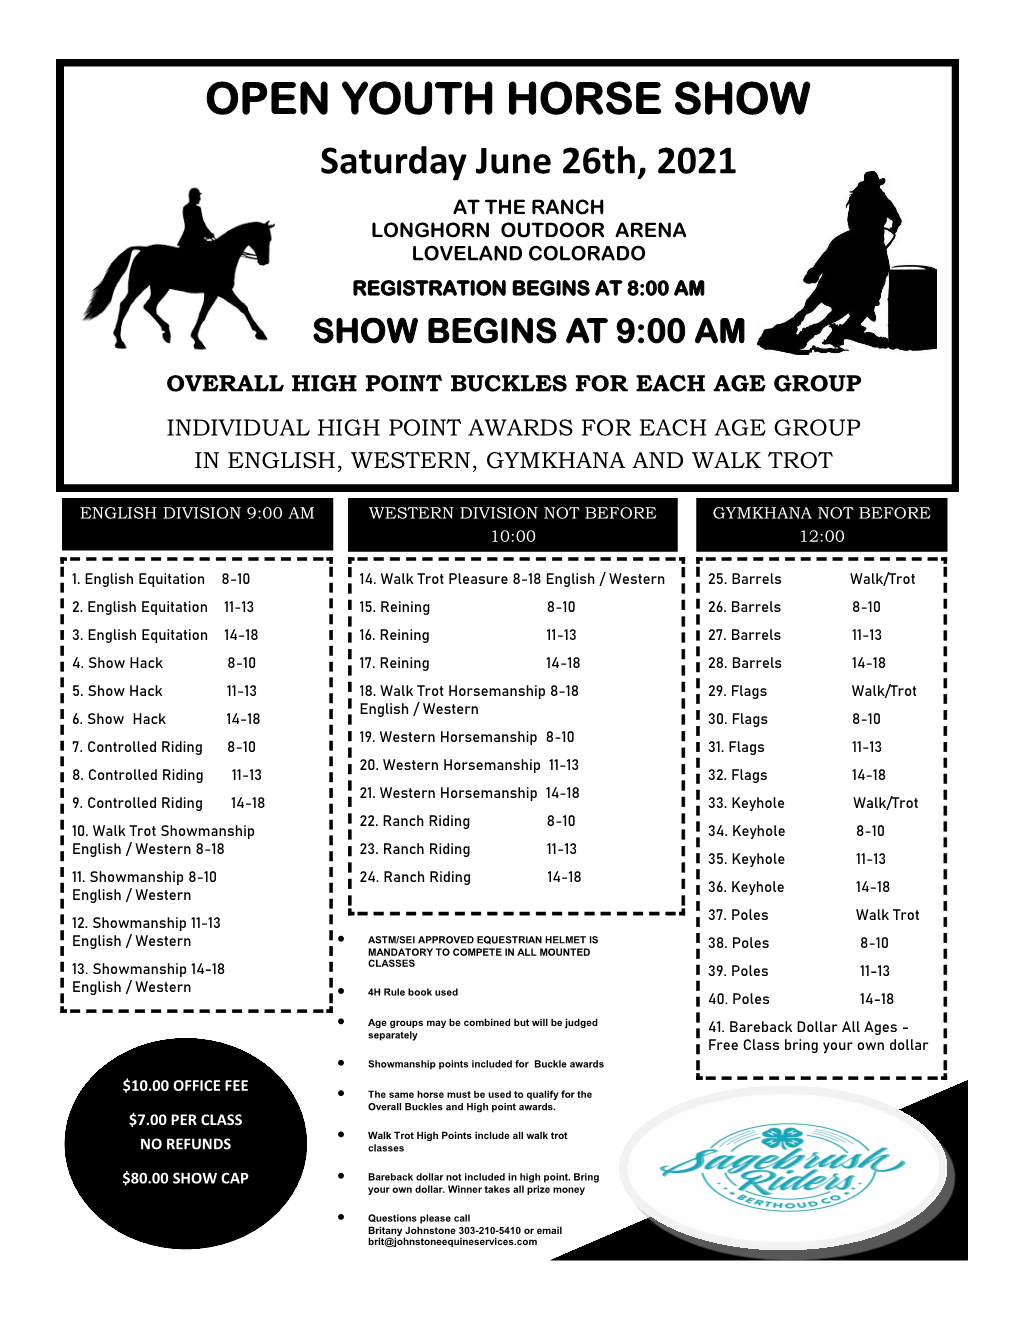 OPEN YOUTH HORSE SHOW Saturday June 26Th, 2021 at the RANCH LONGHORN OUTDOOR ARENA LOVELAND COLORADO REGISTRATION BEGINS at 8:00 AM SHOW BEGINS at 9:00 AM